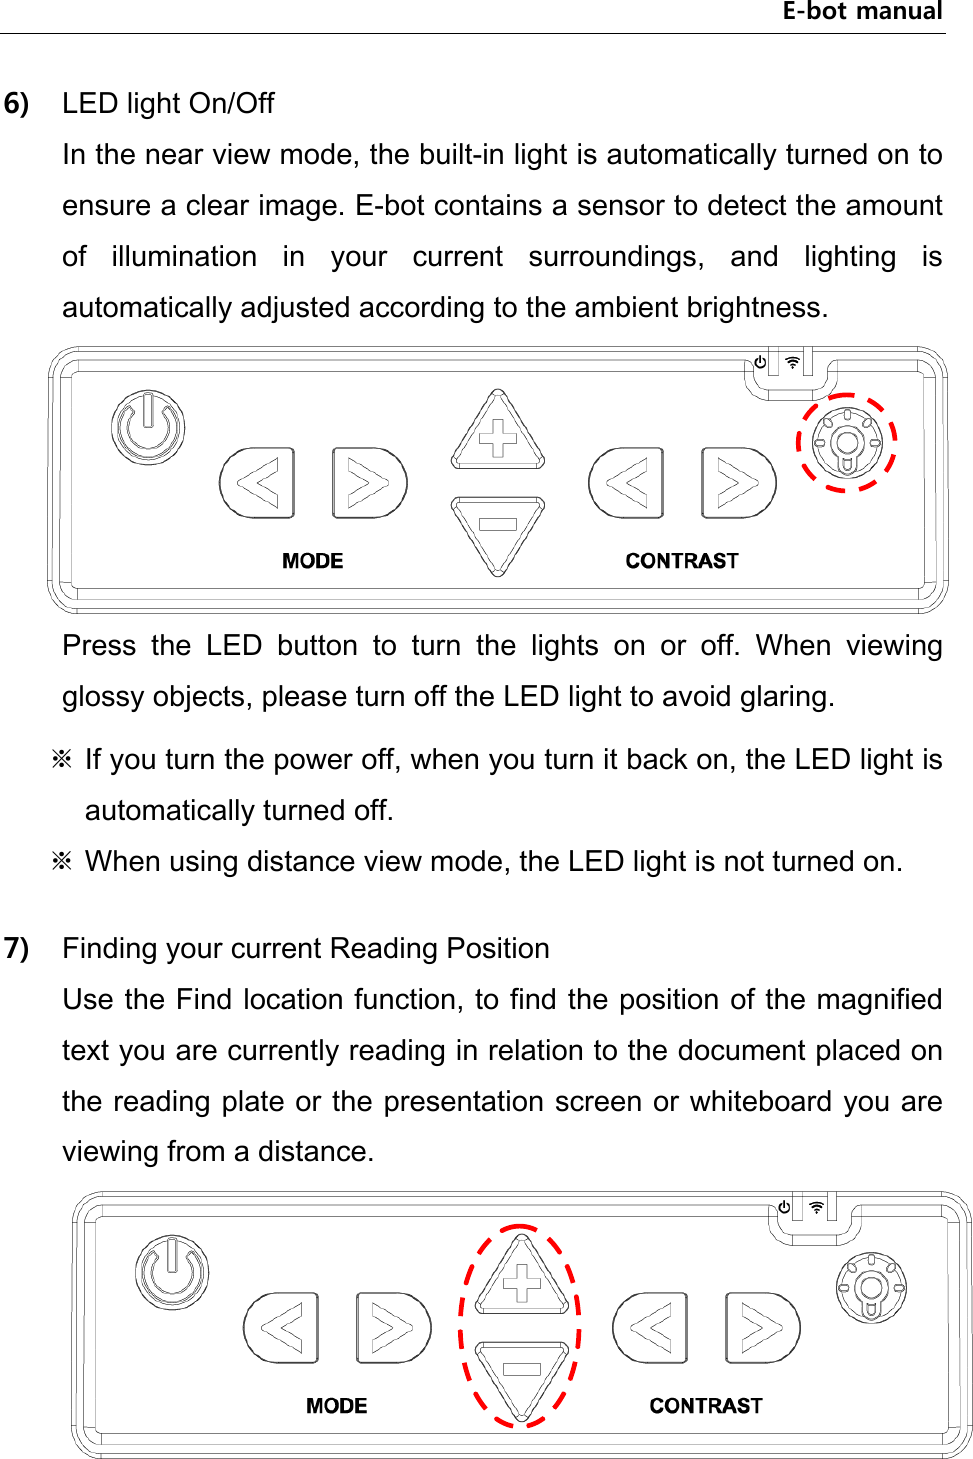 E-bot manual 6) LED light On/Off In the near view mode, the built-in light is automatically turned on to ensure a clear image. E-bot contains a sensor to detect the amount of  illumination  in  your  current  surroundings,  and  lighting  is automatically adjusted according to the ambient brightness.    Press  the  LED  button  to  turn  the  lights  on  or  off.  When  viewing glossy objects, please turn off the LED light to avoid glaring. ※ If you turn the power off, when you turn it back on, the LED light is automatically turned off. ※ When using distance view mode, the LED light is not turned on.    7) Finding your current Reading Position Use the Find location function, to find the position of the magnified text you are currently reading in relation to the document placed on the reading plate or the presentation screen or whiteboard you are viewing from a distance.  